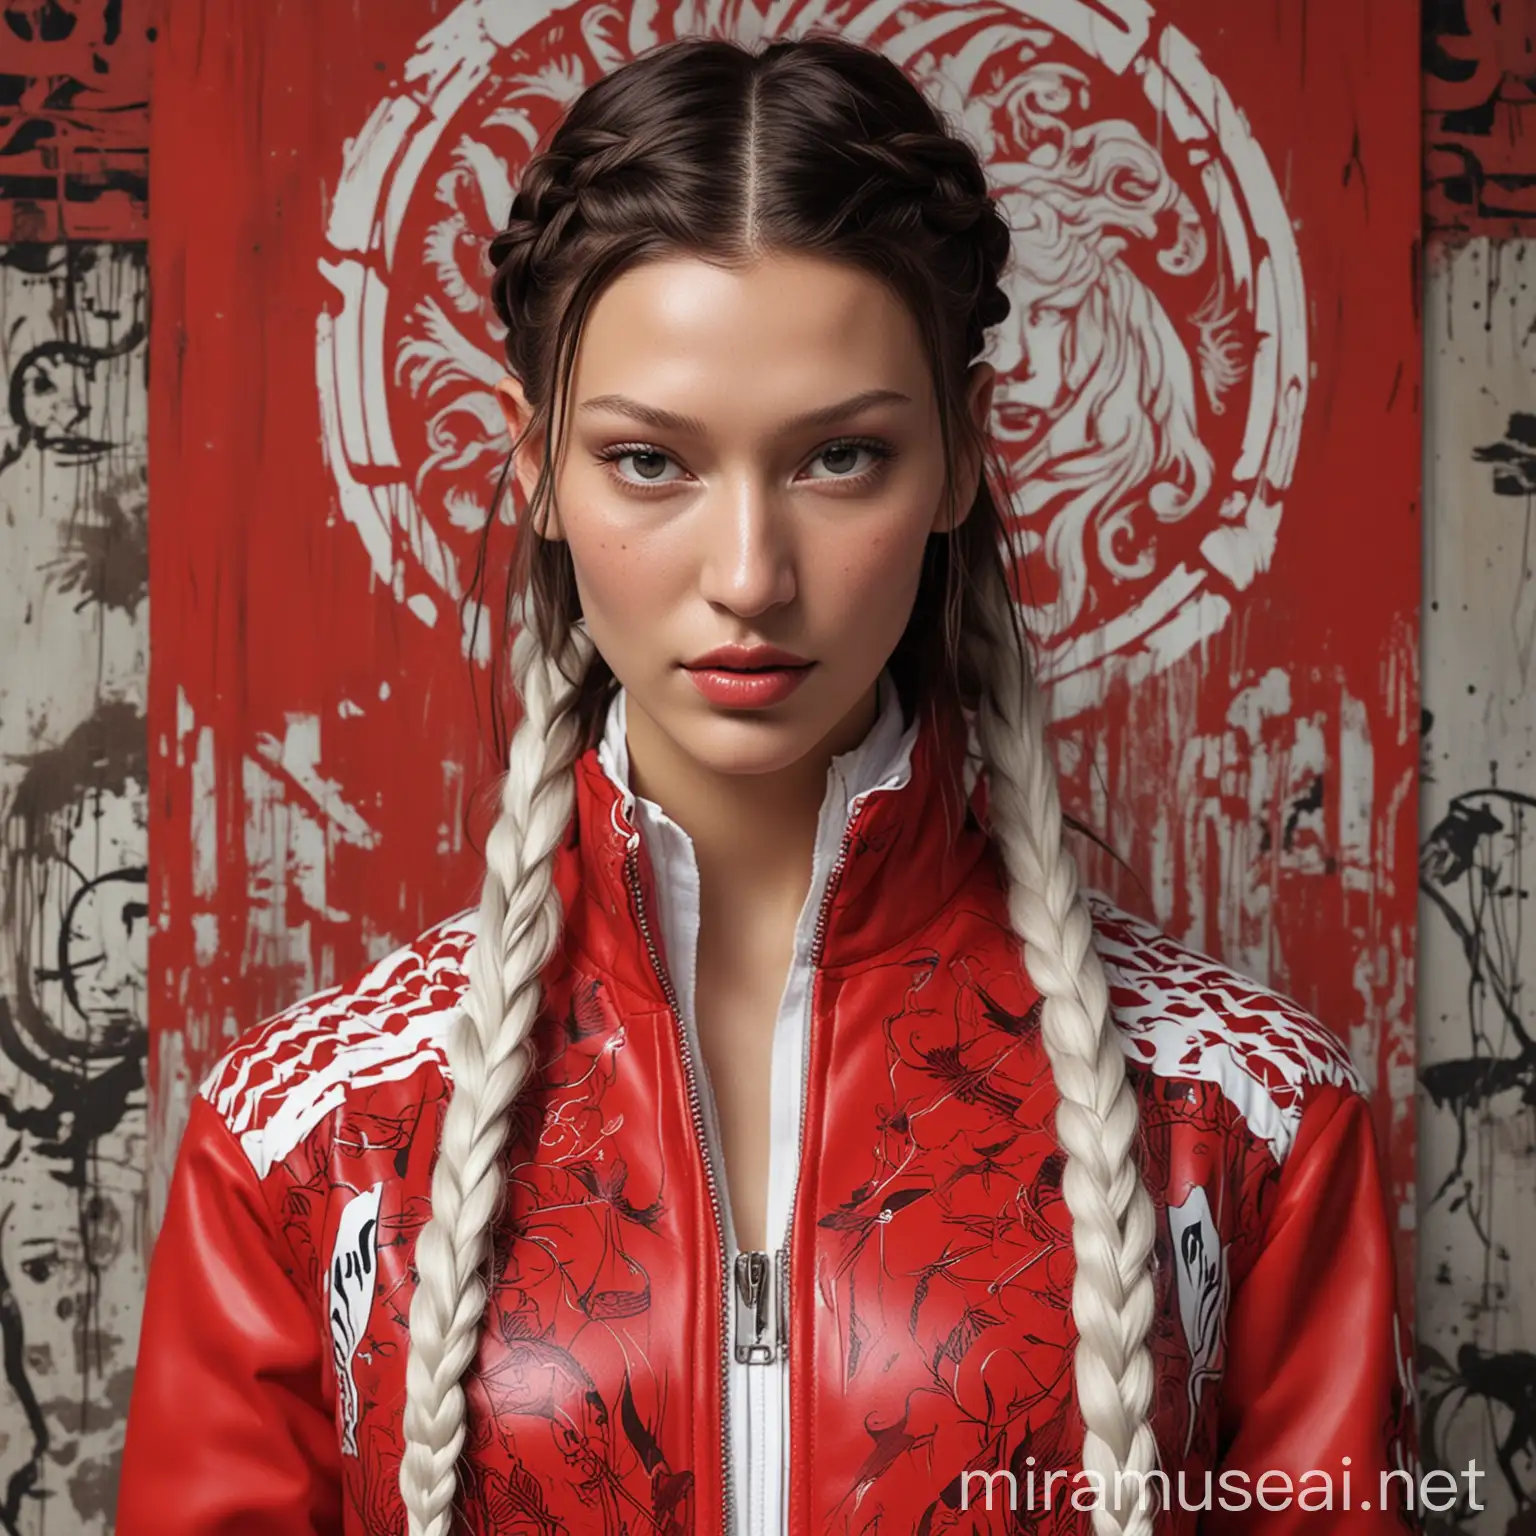 Bella Hadid Portrait in Game of Thrones Style with Rustic Futuristic Twist